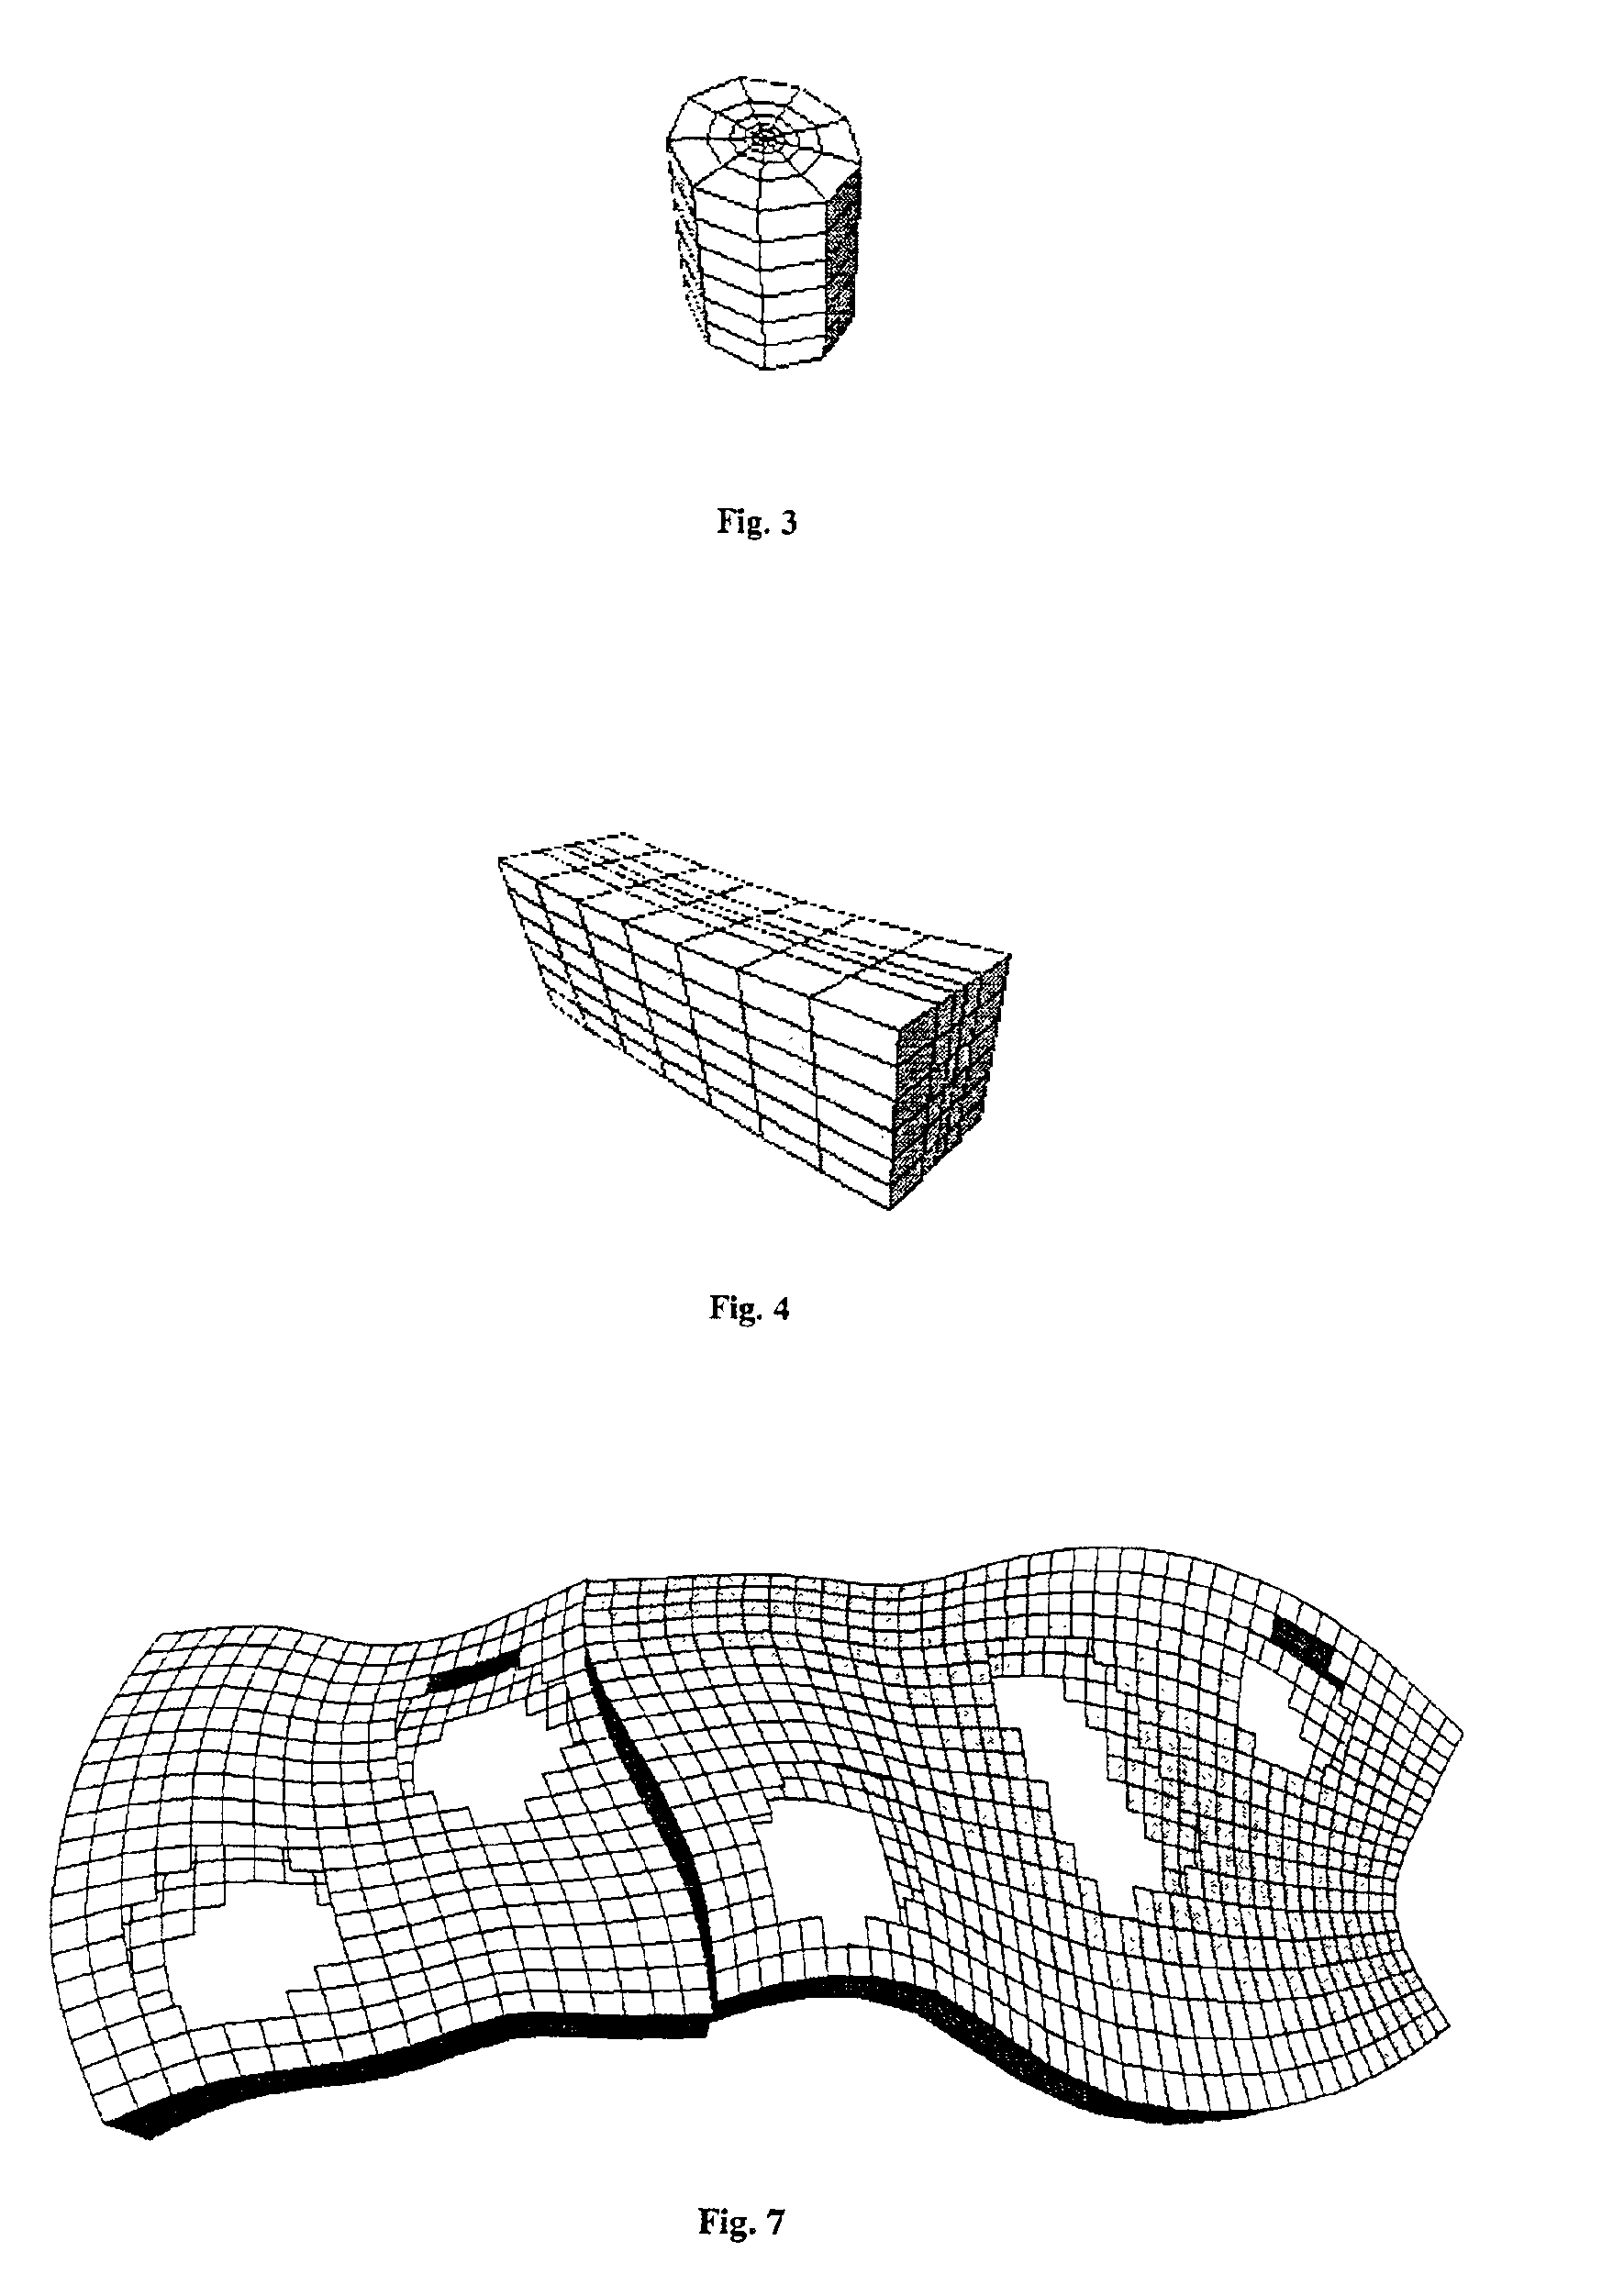 Method of generating a hybrid grid allowing modelling of a heterogeneous formation crossed by one or more wells